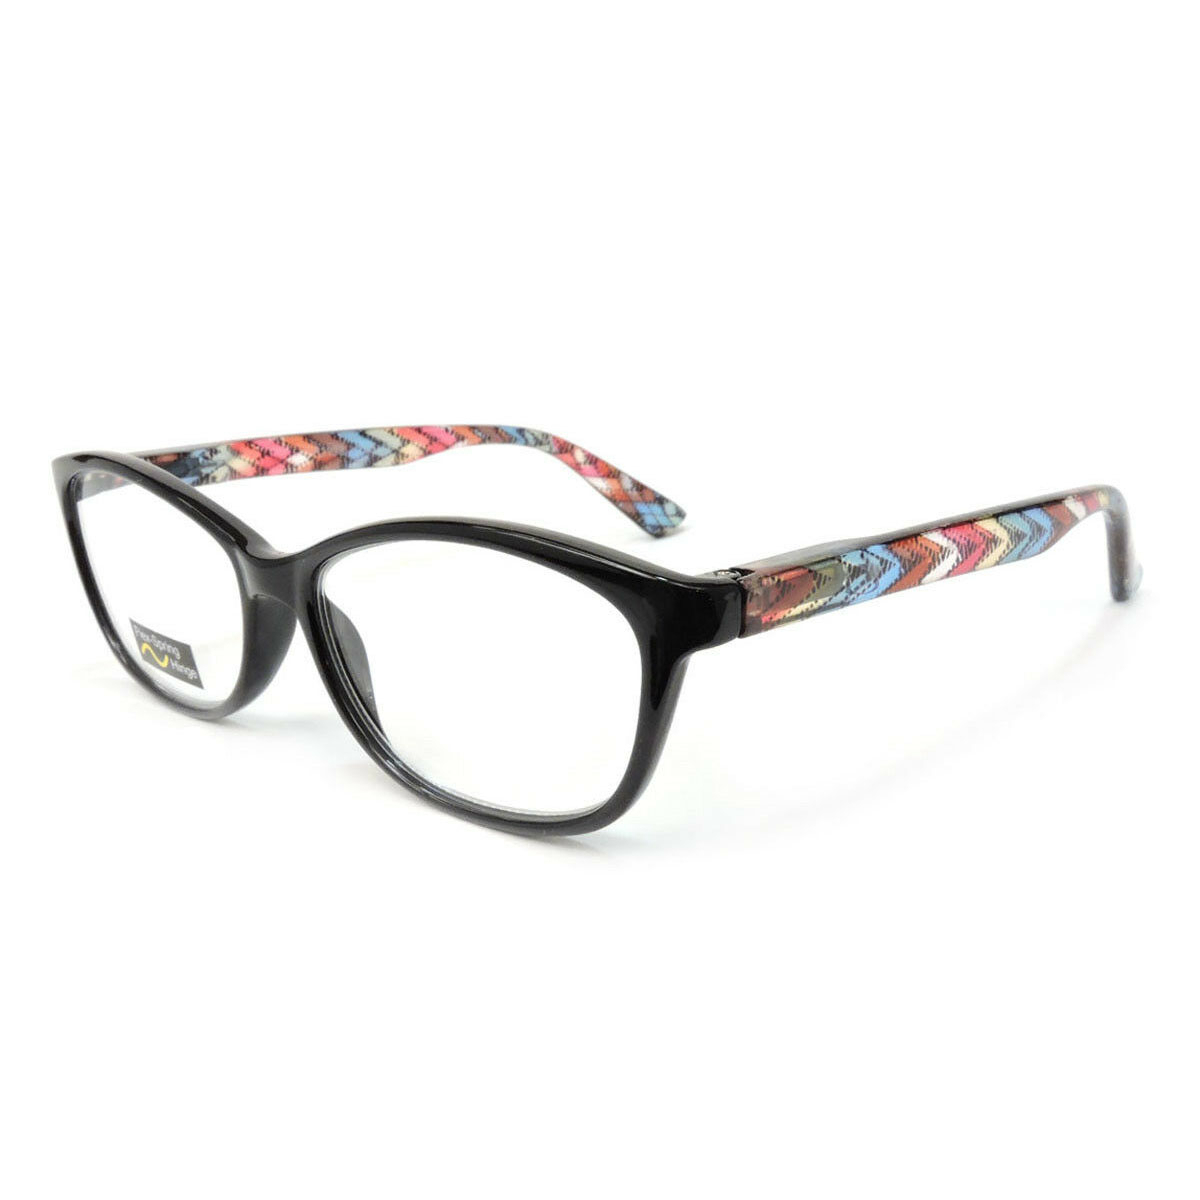 Classic Frame Reading Glasses Colorful Arms Retro Vintage Style - Black, +1.50